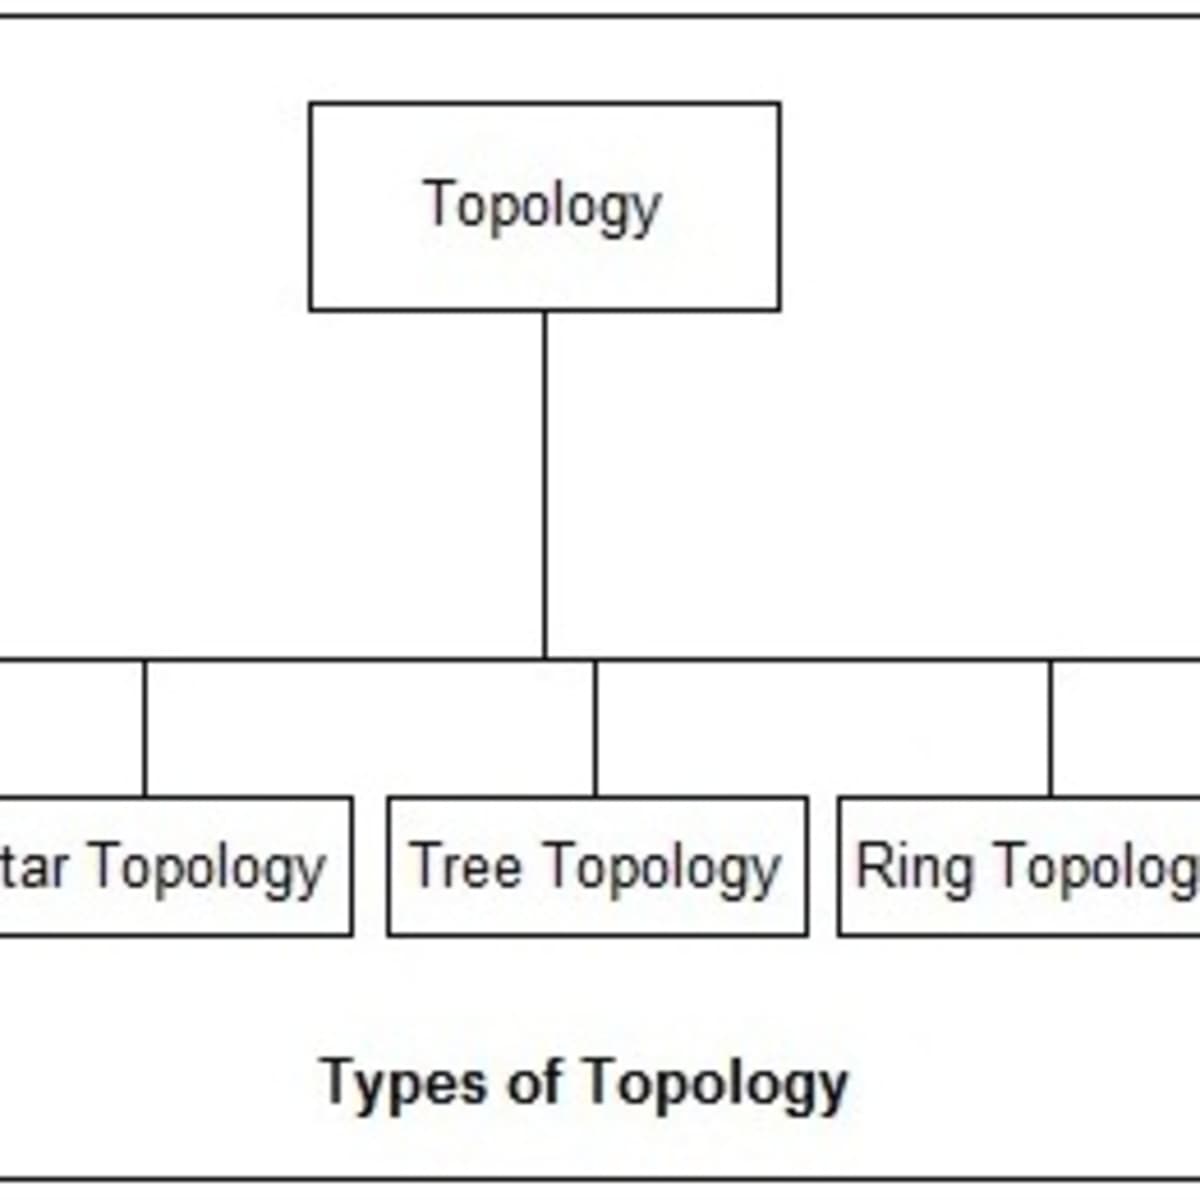 ring topology | MPLS NET